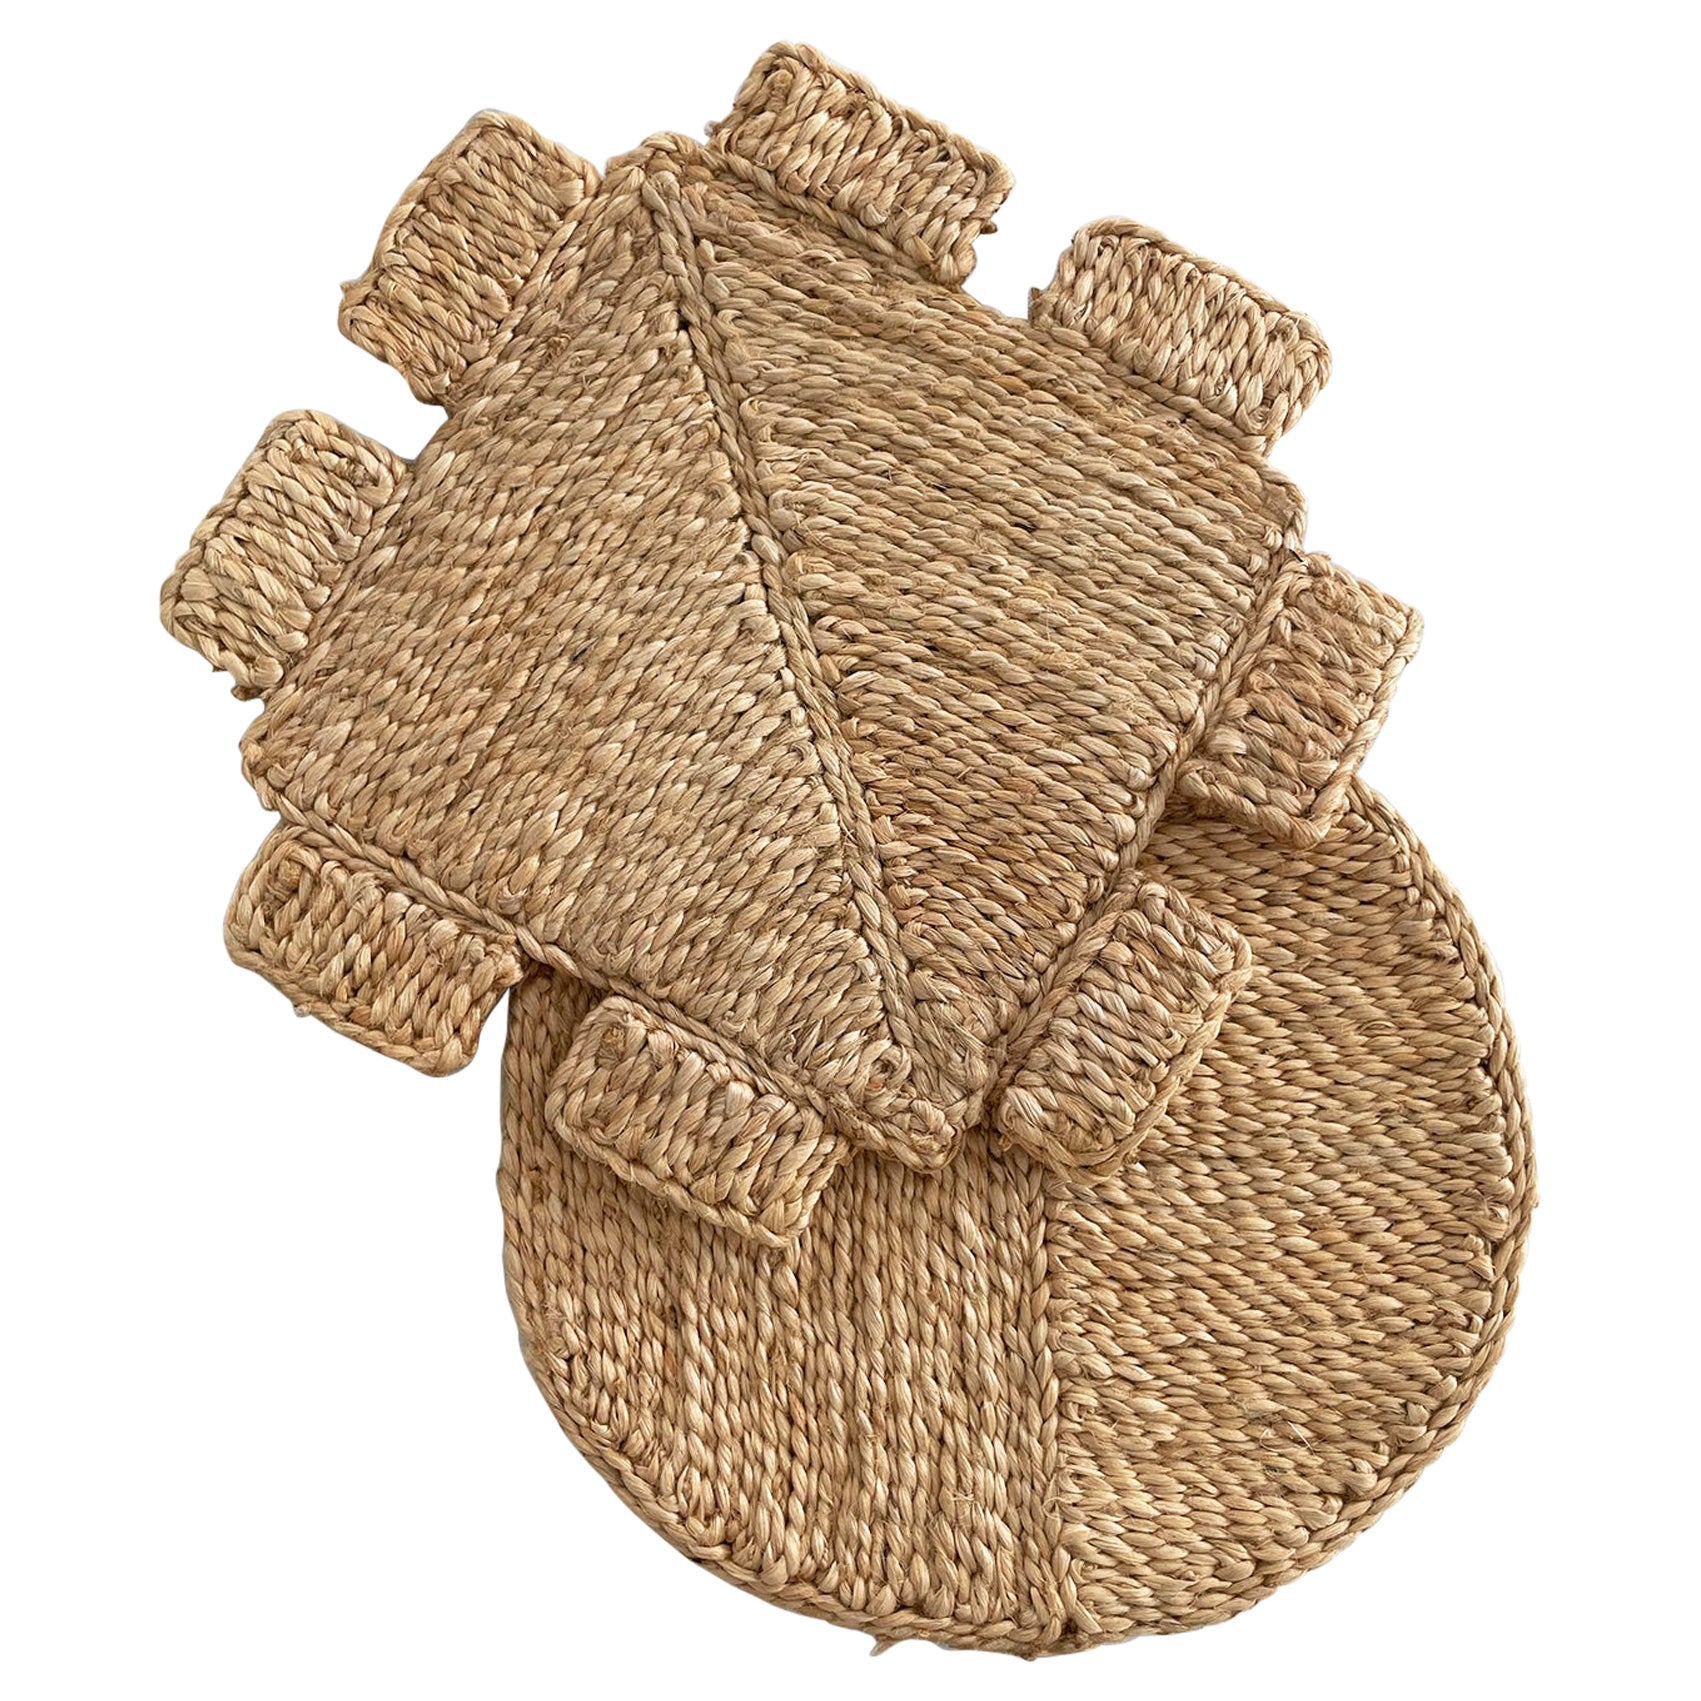 Jute Block Placemats and Trivets by, J'Jute